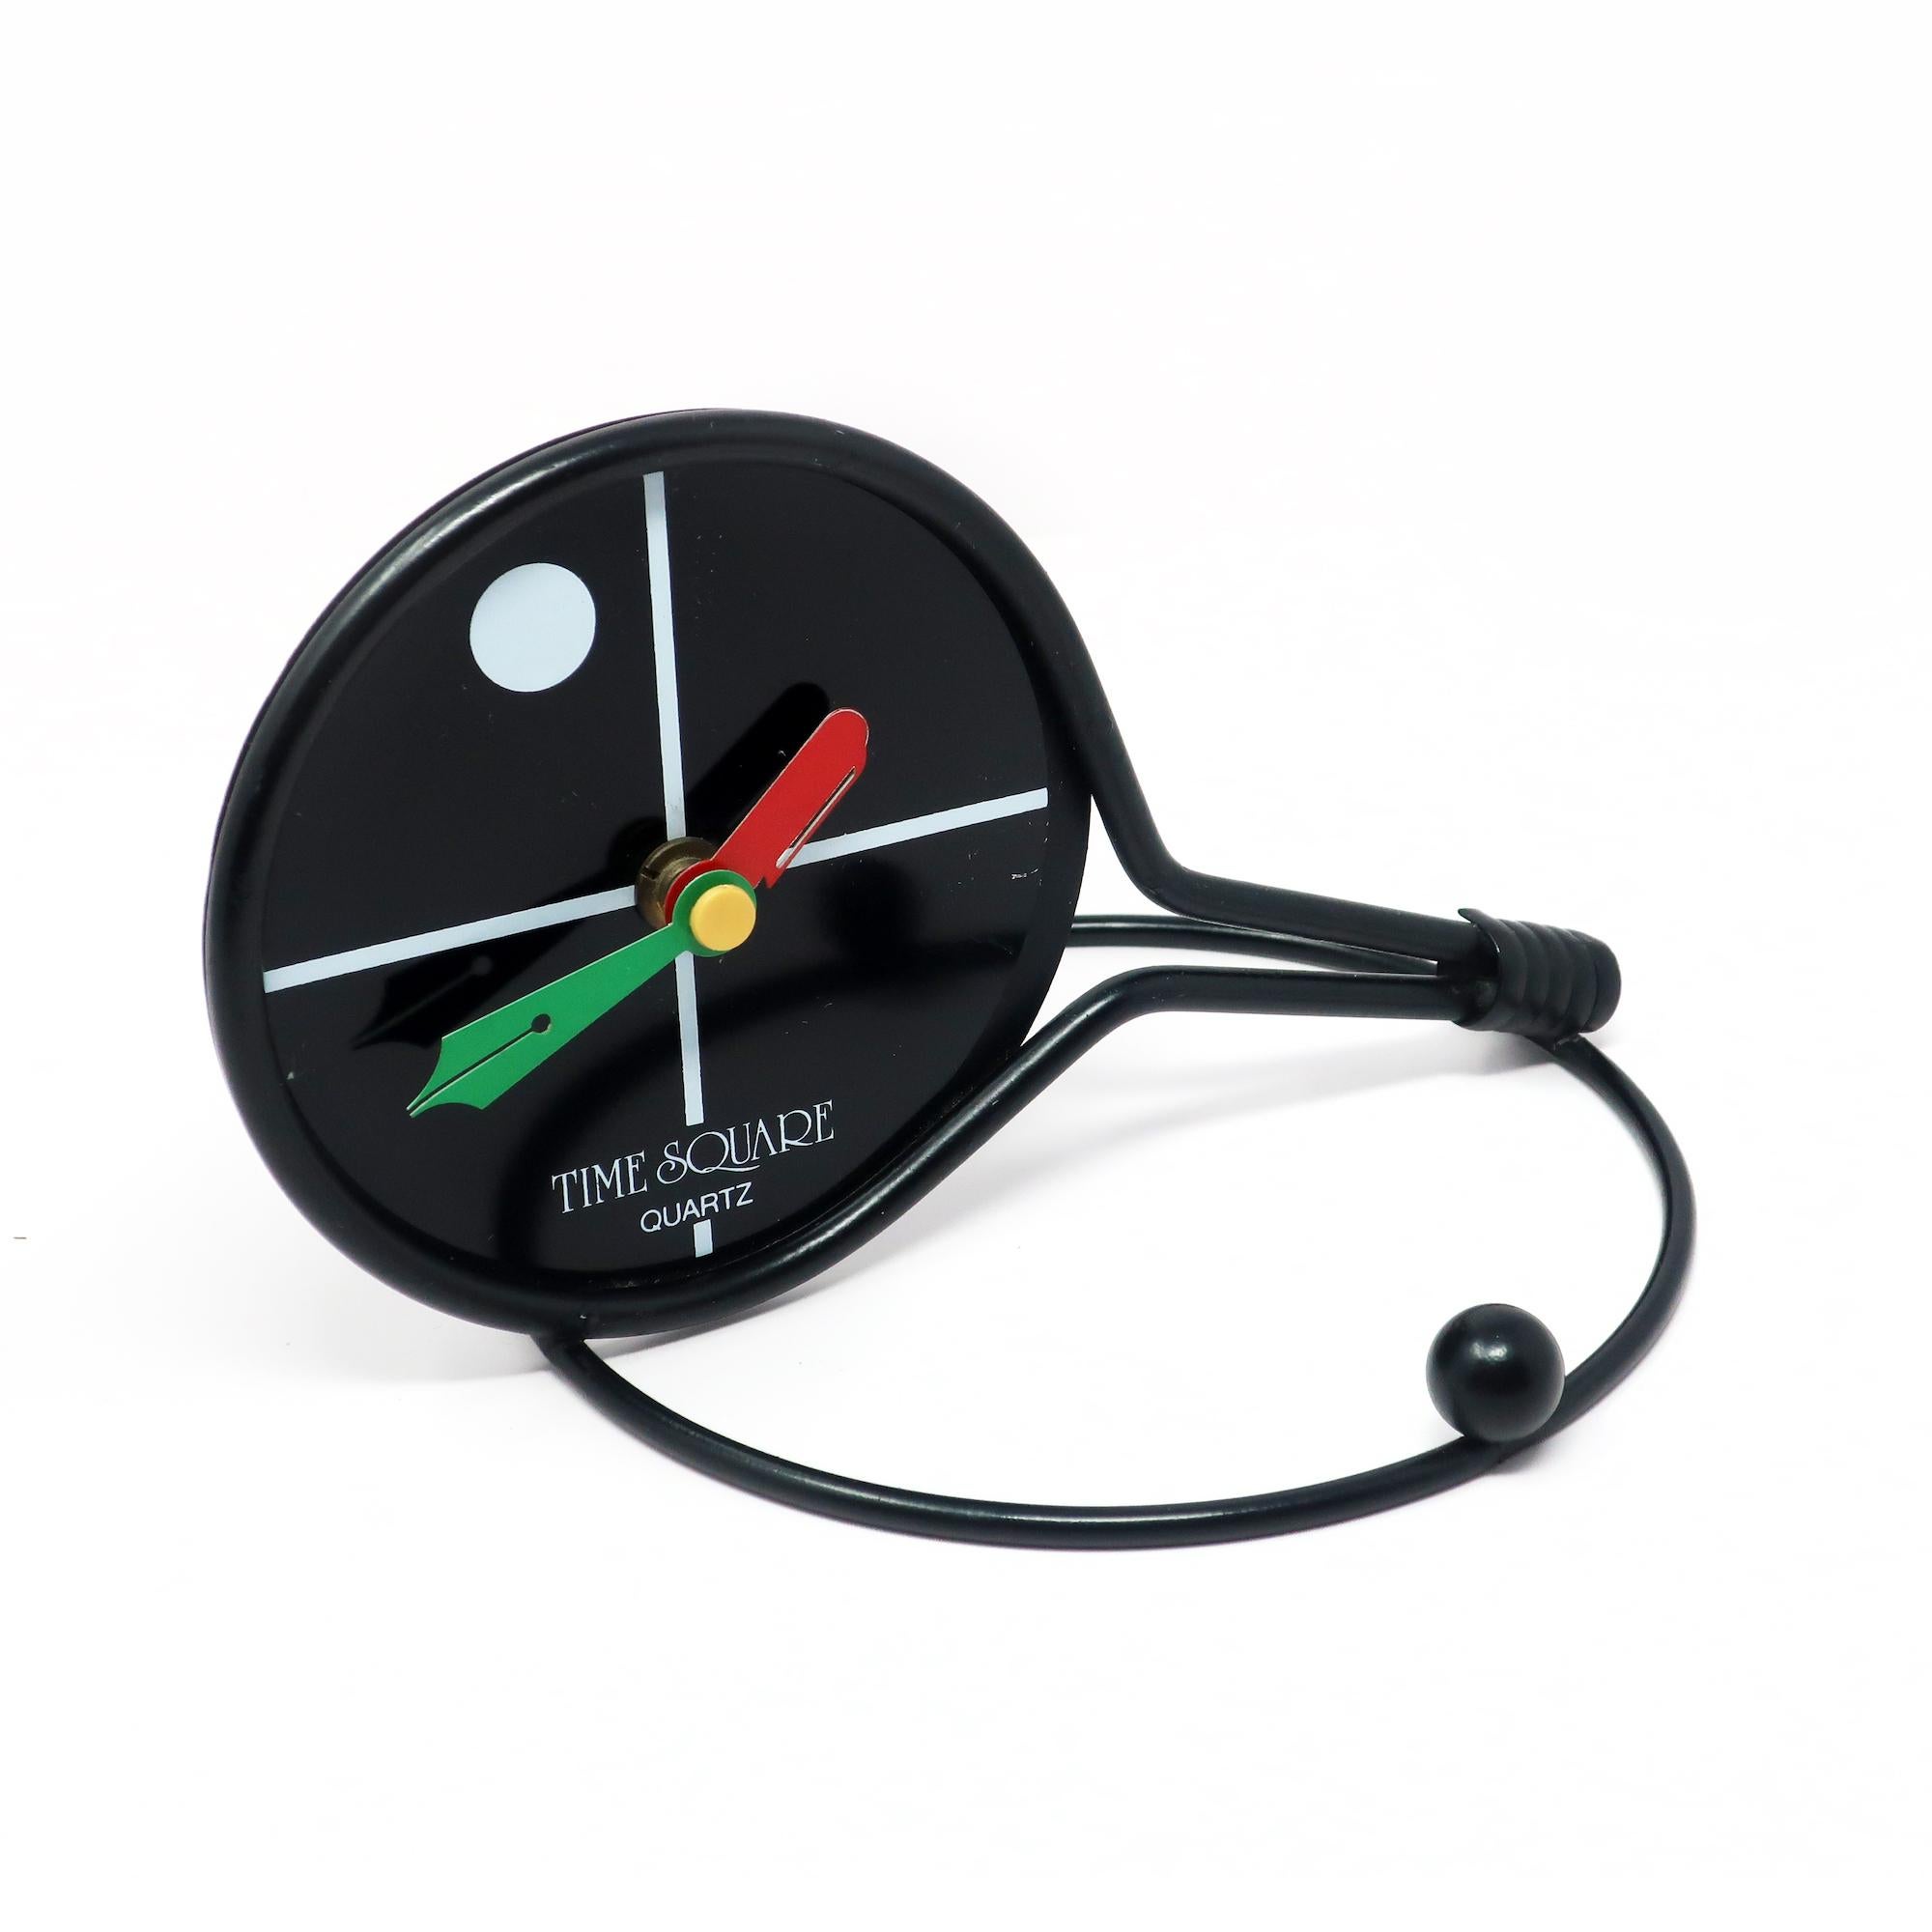 A whimsical desk or shelf clock in the shape of a tennis racket hitting a ball. Black metal racket, ball, and stand with a black face with red, green, yellow, and white accents. Perfect for tennis lovers or fans of whimsical clocks and other